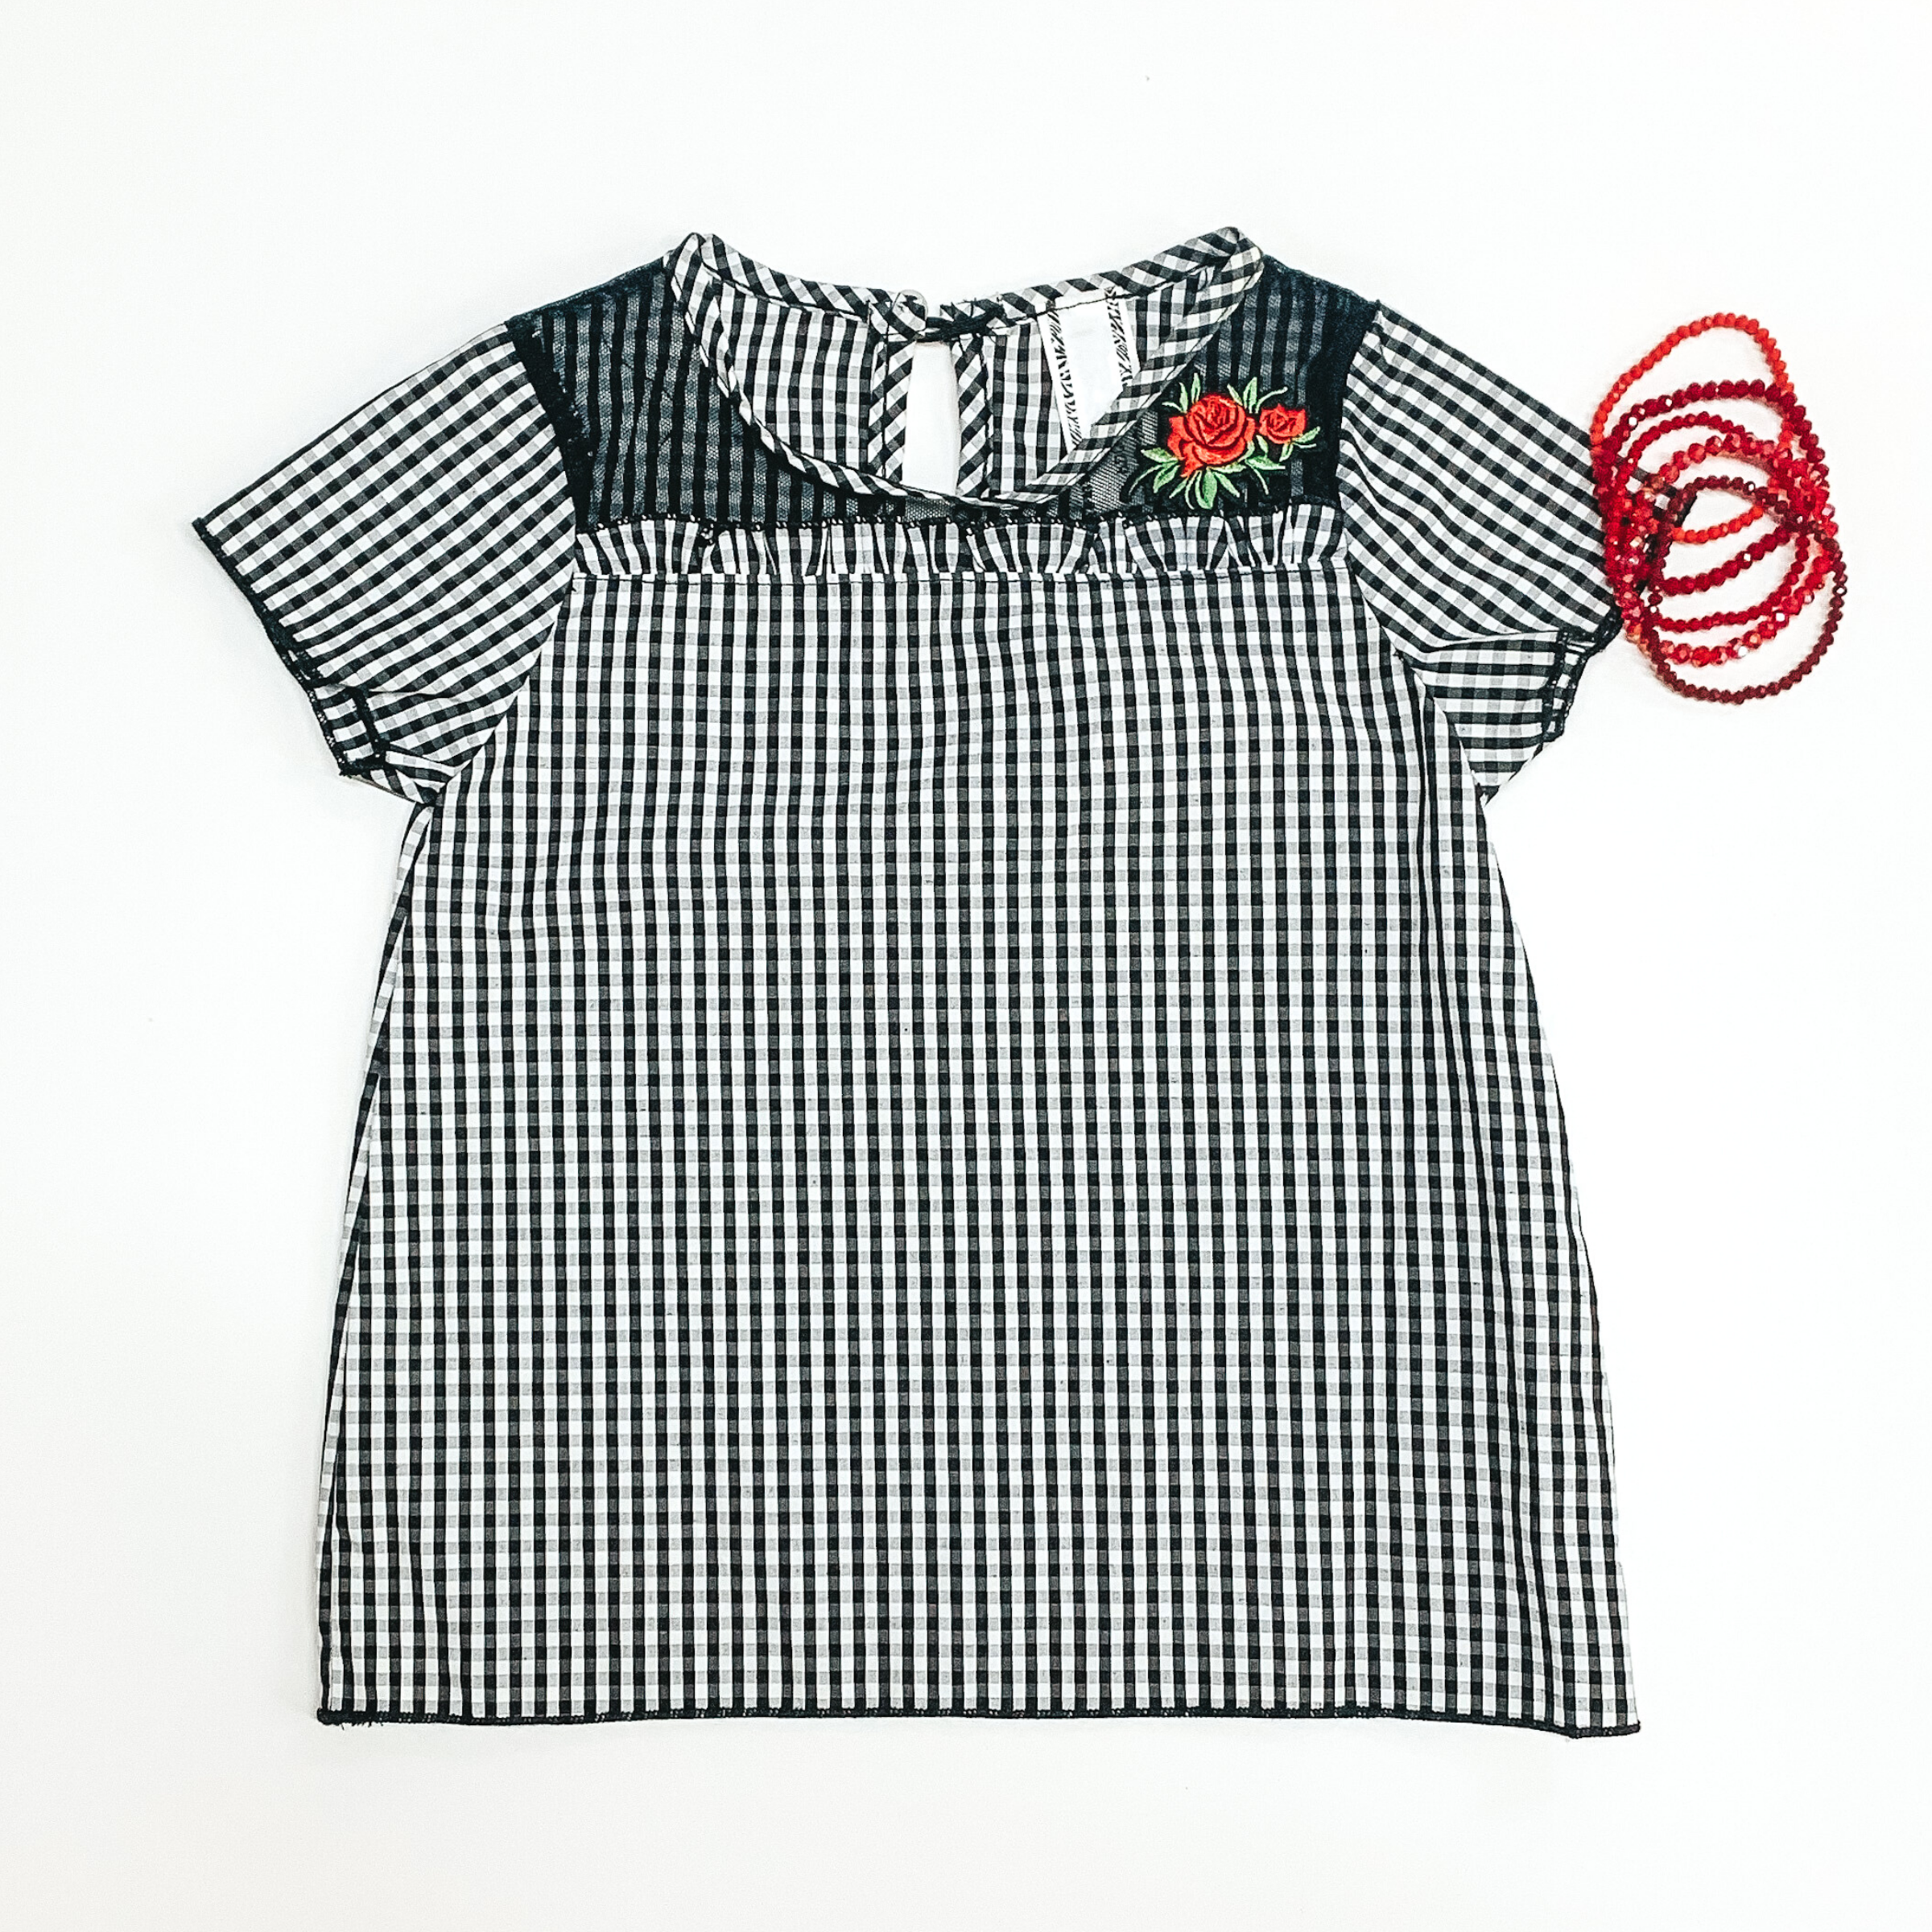 Little Kid's Black and White Blouse with Rose Detailing - Giddy Up Glamour Boutique